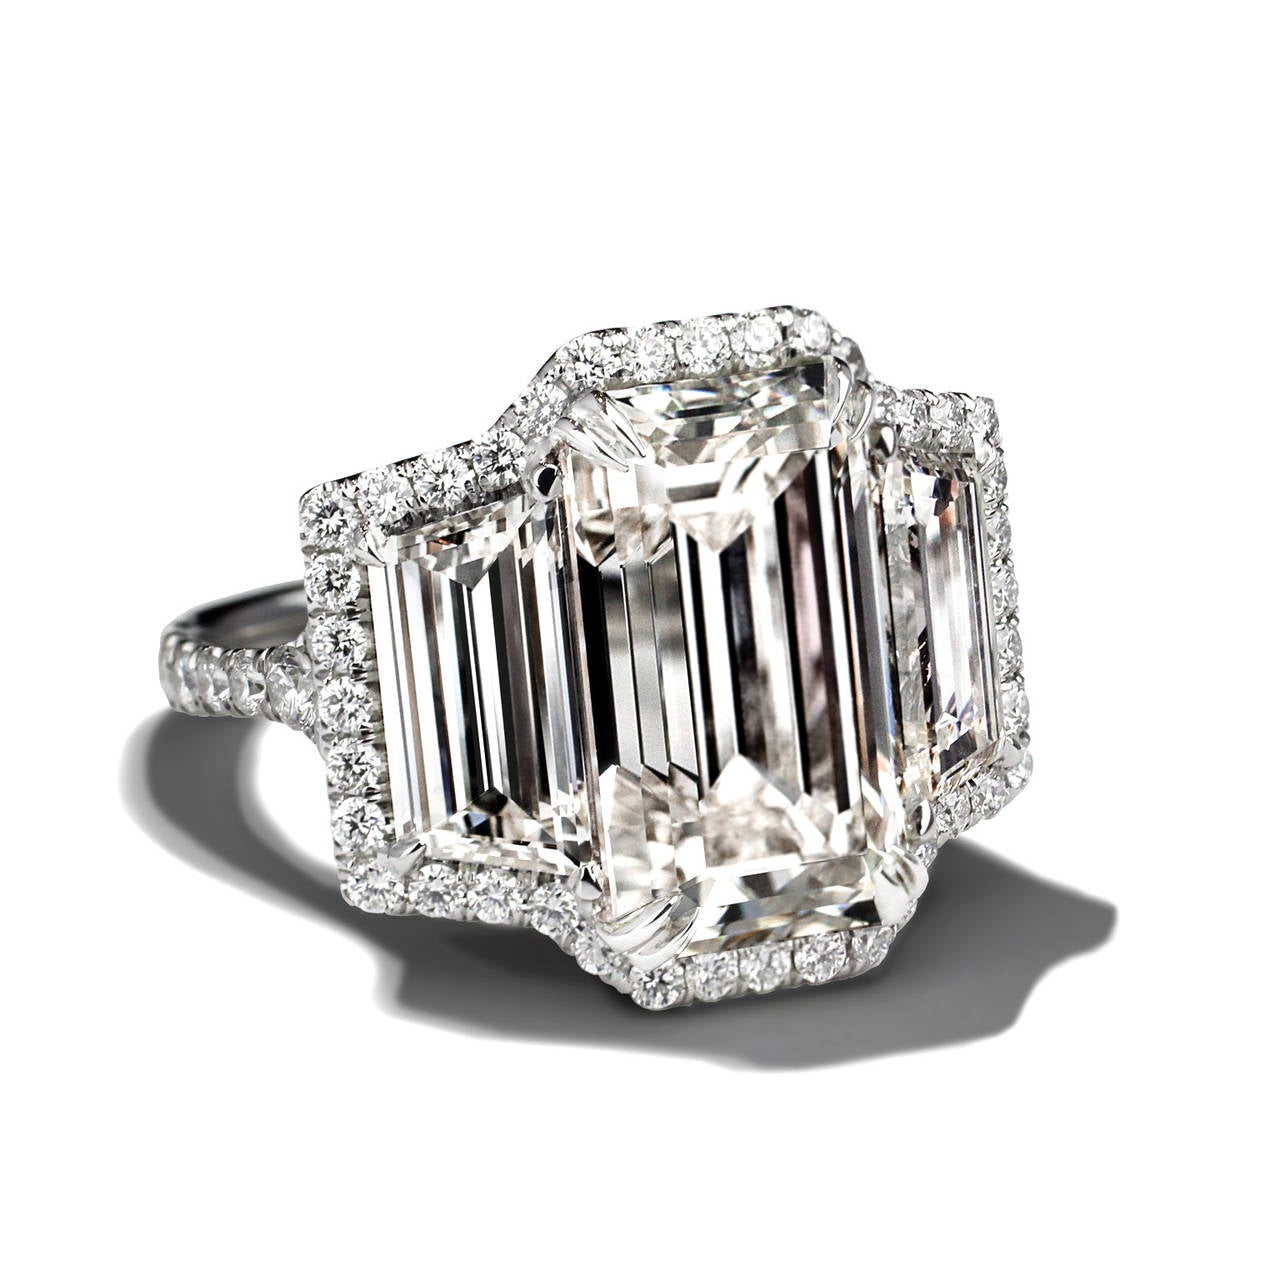 Wow! What a look for the money! 

A mesmerizing Emerald Cut Diamond is featured in this beautiful handmade platinum mounting. The center stone is 6.39cts and has a color and clarity of L VS1. The stone is flanked by 2 trapezoids with a combined